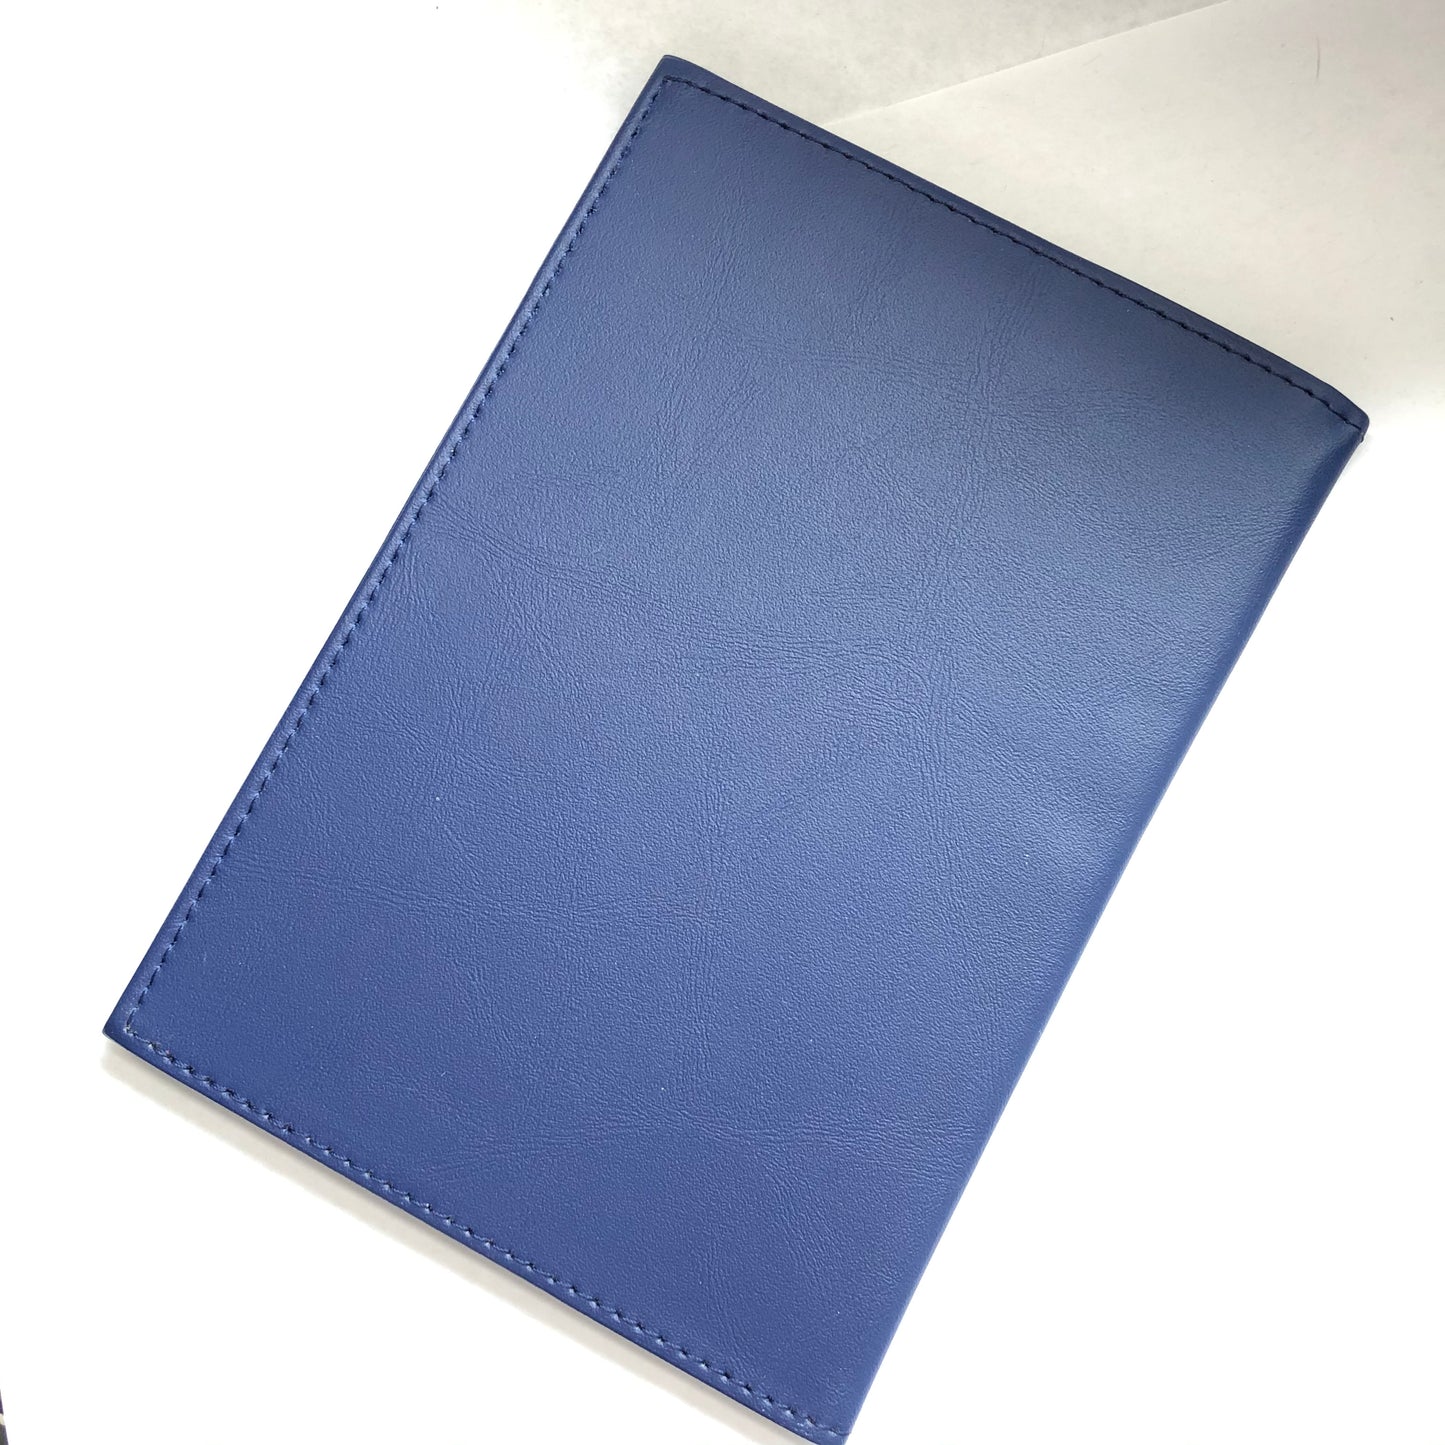 CHOPARD Blue Faux Leather Documents Folder 4.75 x 6.75 inches